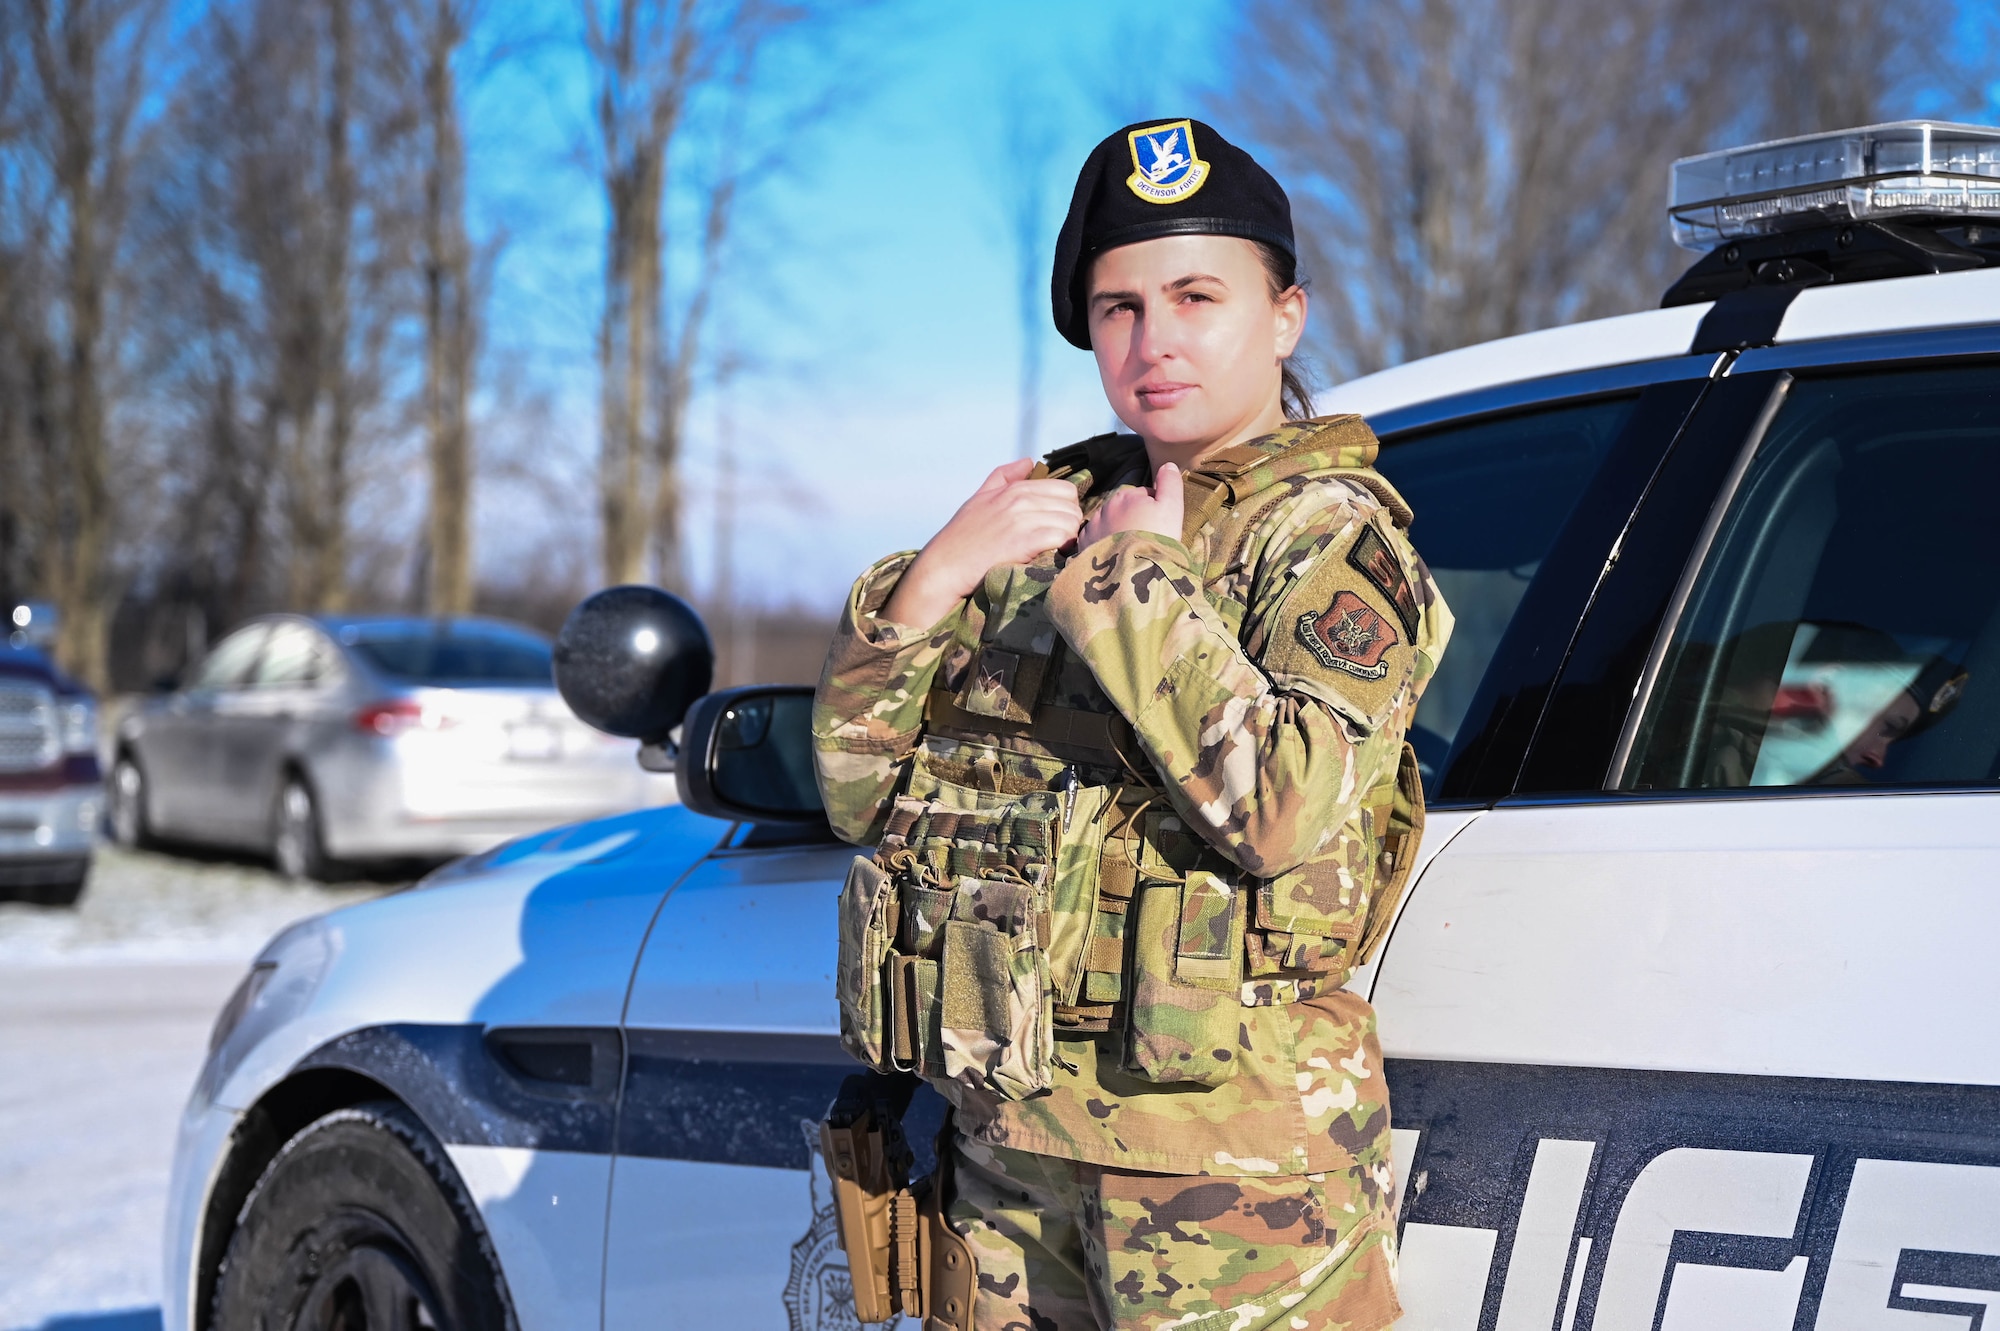 Senior Airman Viktoria Senkiv, a fireteam member assigned to the 910th Security Forces Squadron, poses for a photo beside a 910th SFS interceptor vehicle, Jan. 8, 2022.